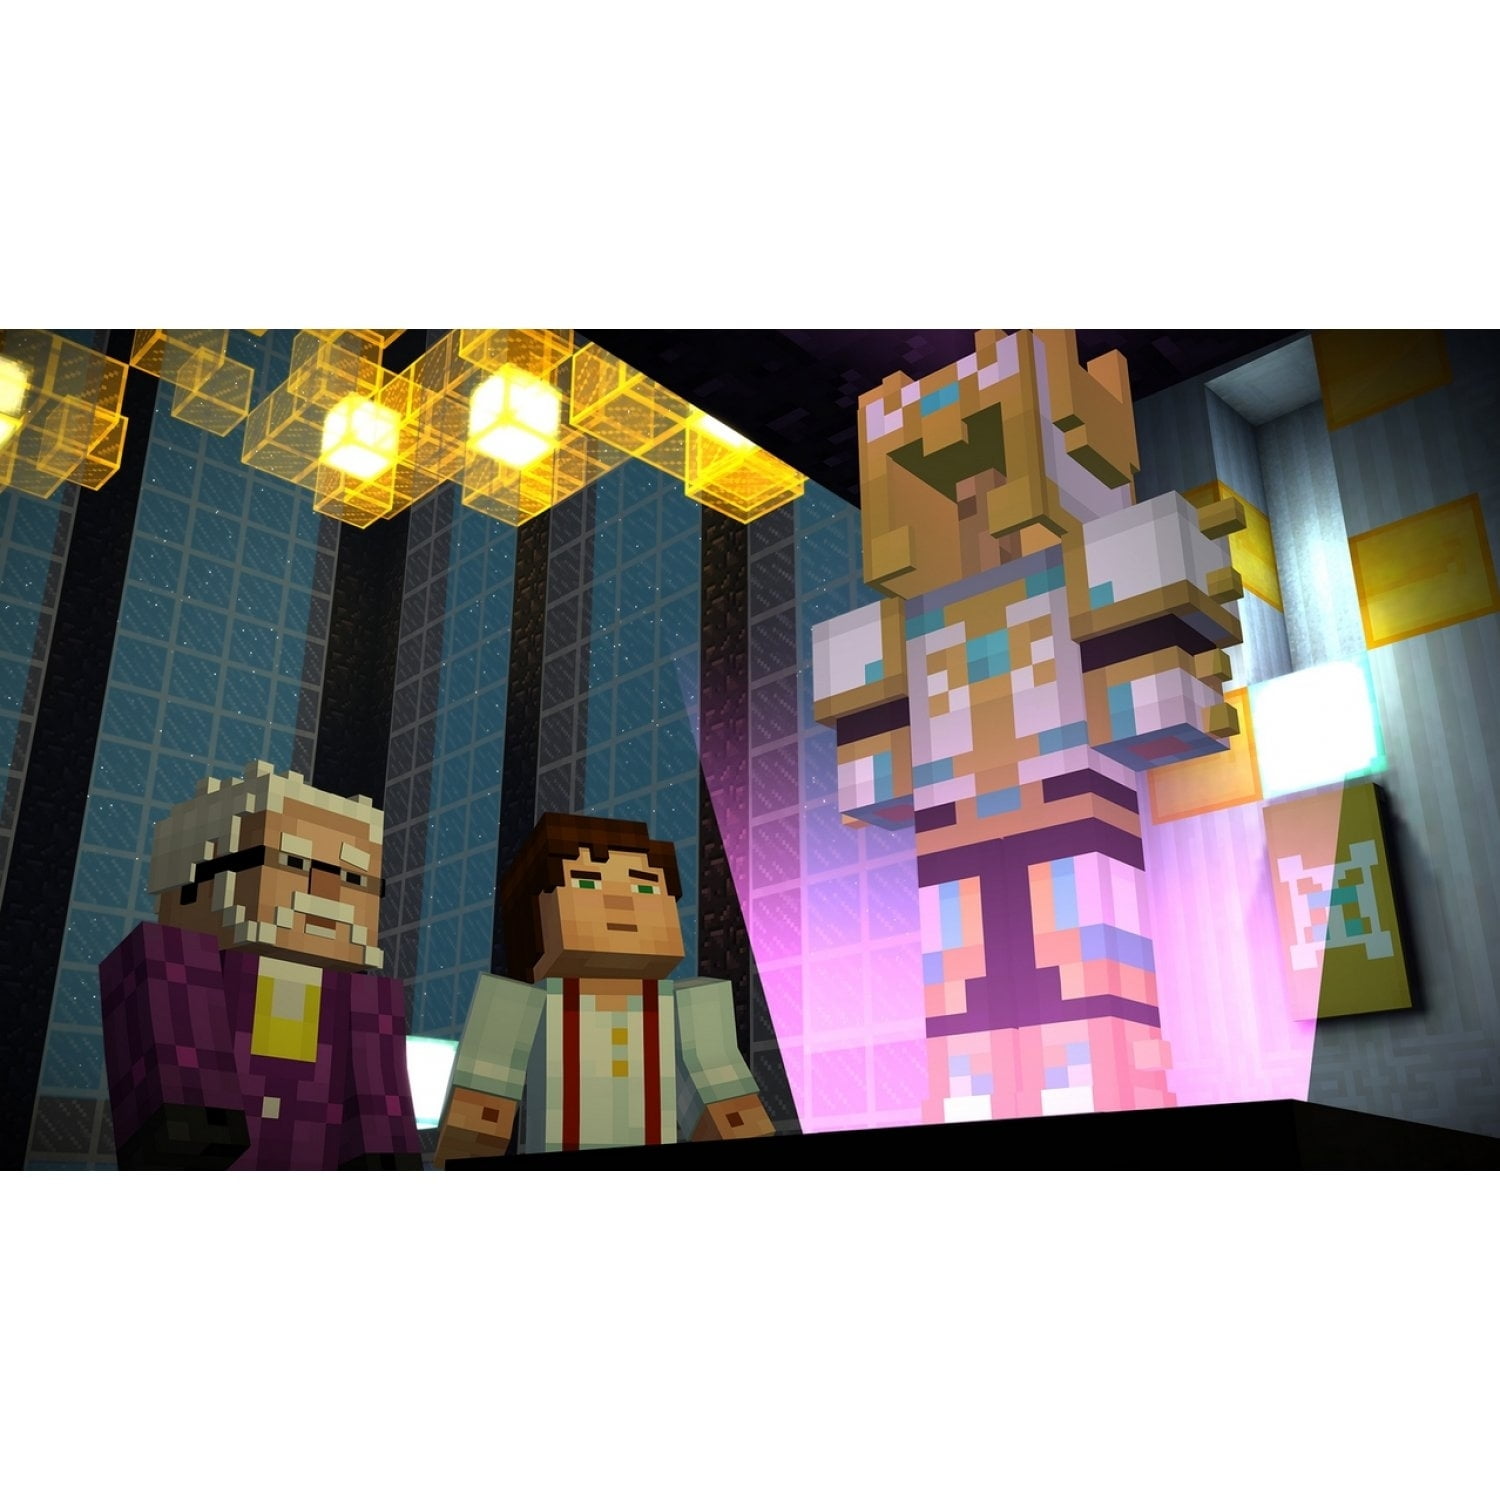 Minecraft: Story Mode- The Complete Adventure - PlayStation 4